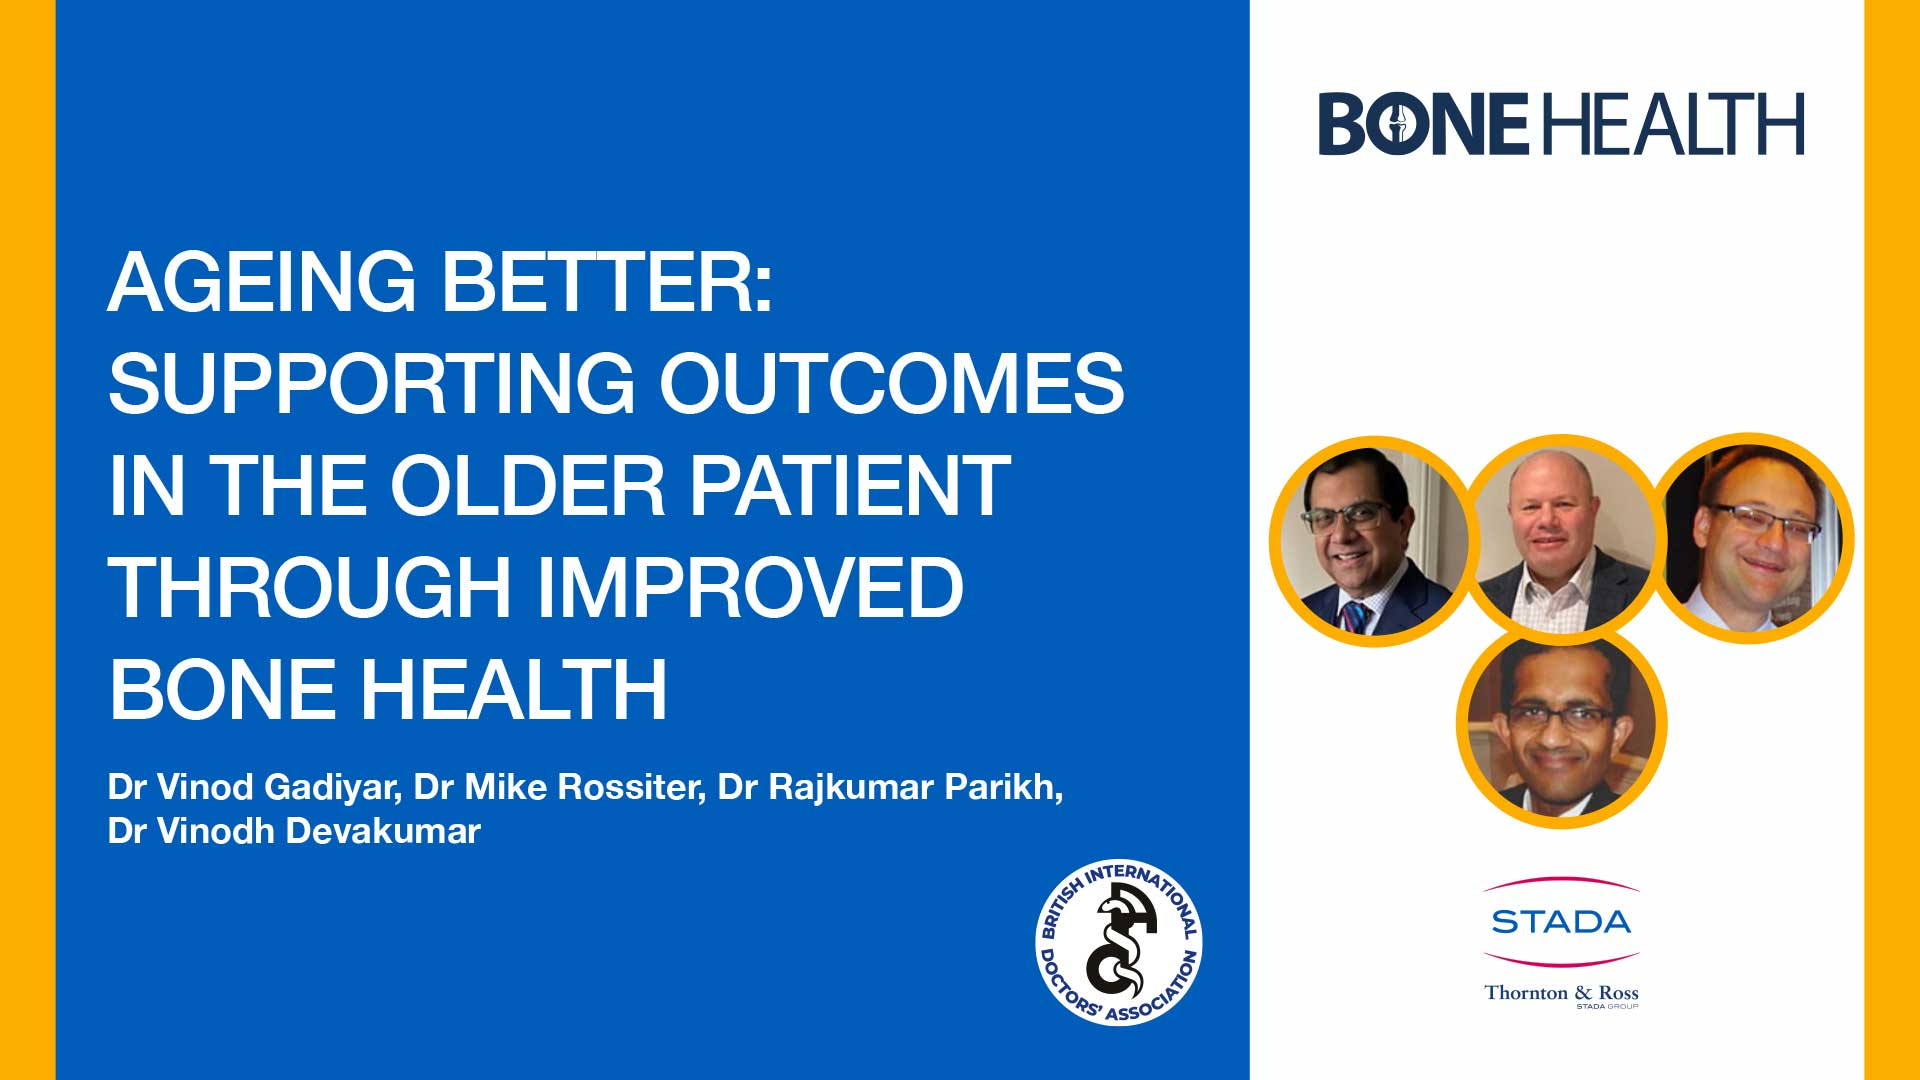  Ageing Better: Supporting Outcomes in the Older Patient through Improved Bone Health